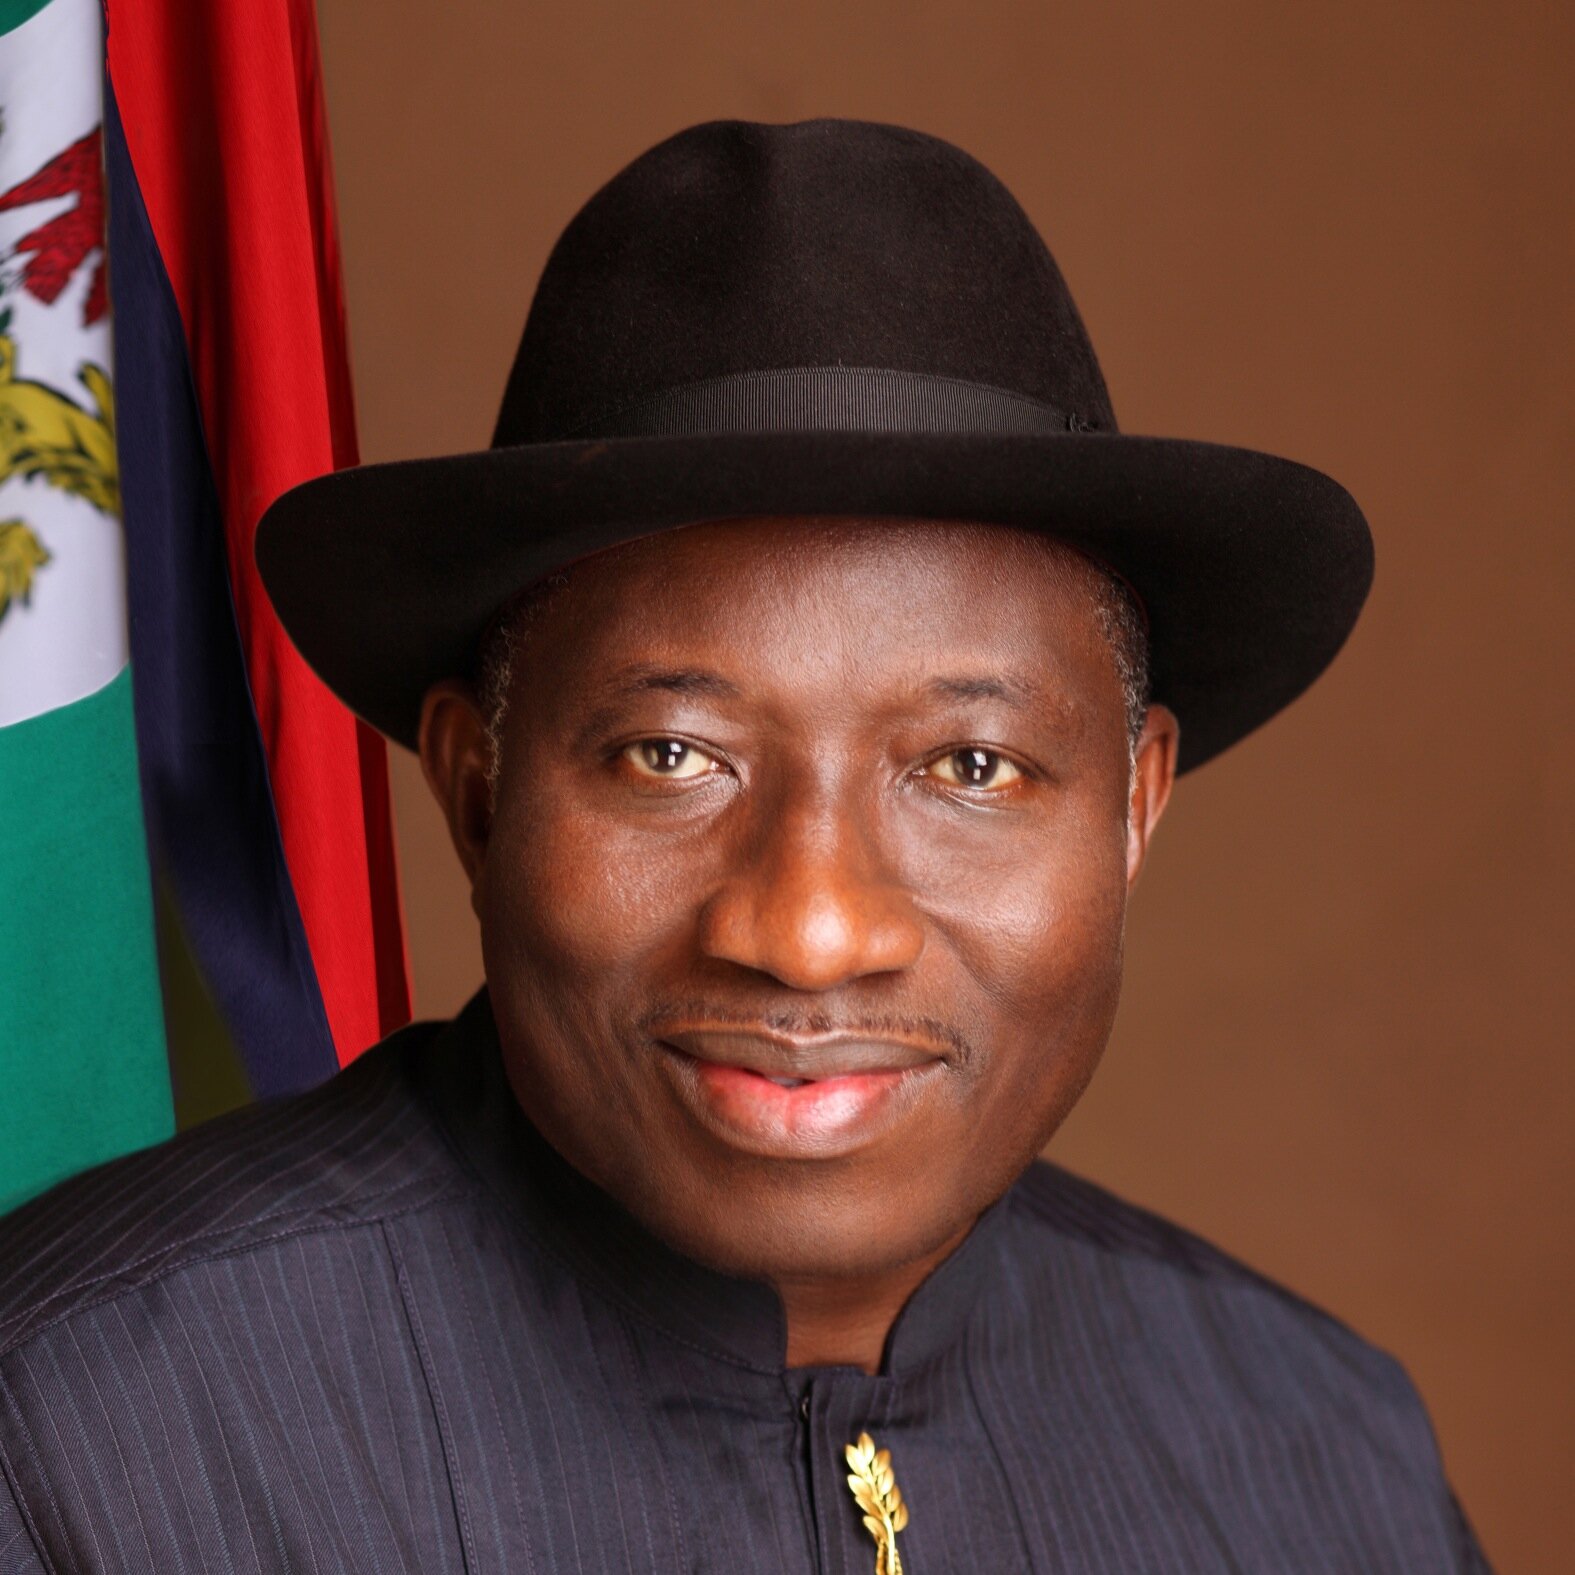 The OFFICIAL Twitter account for Goodluck Jonathan, President of The Federal Republic of Nigeria.